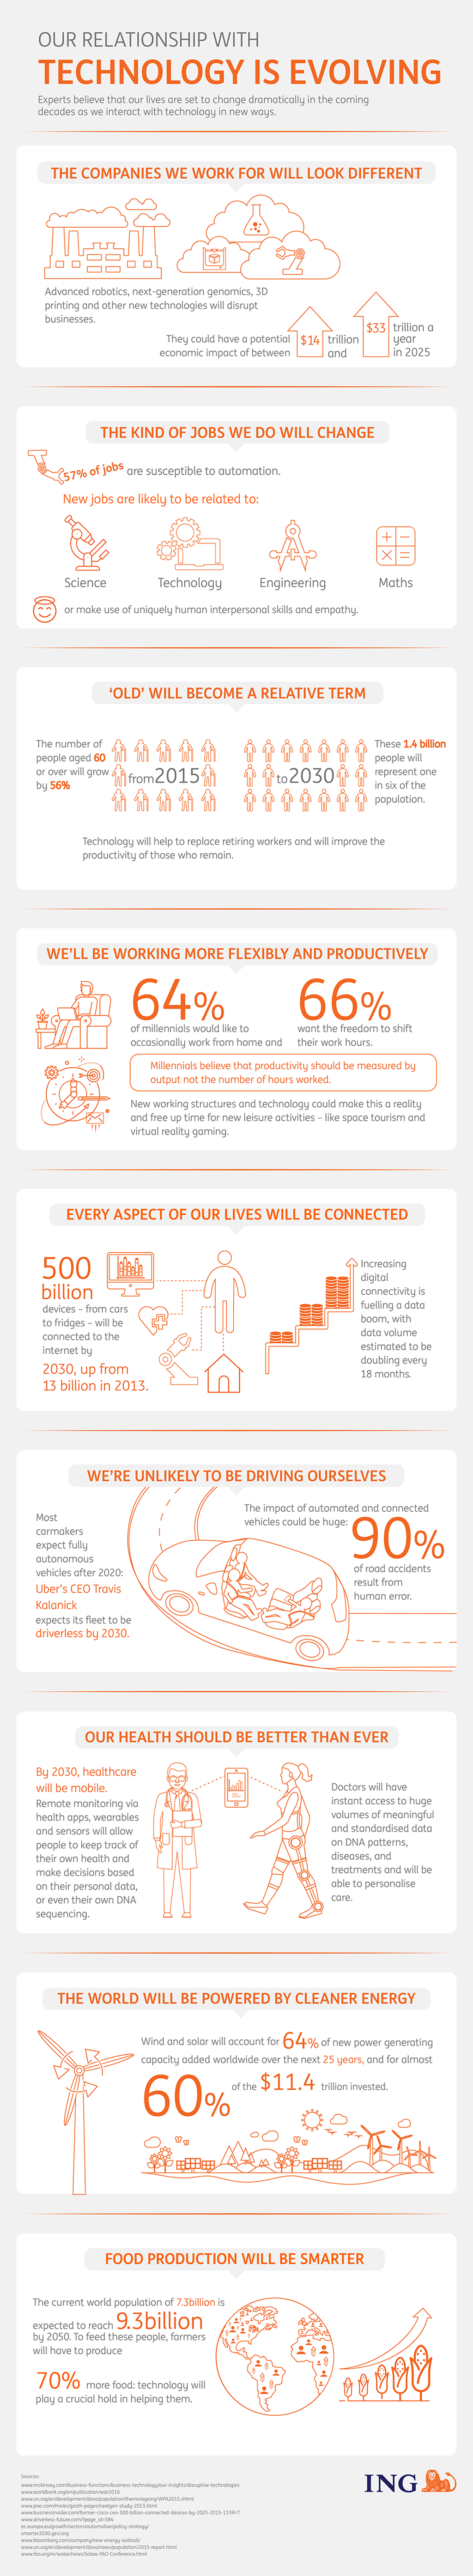 infografica tecnologia nel 2030 by ING